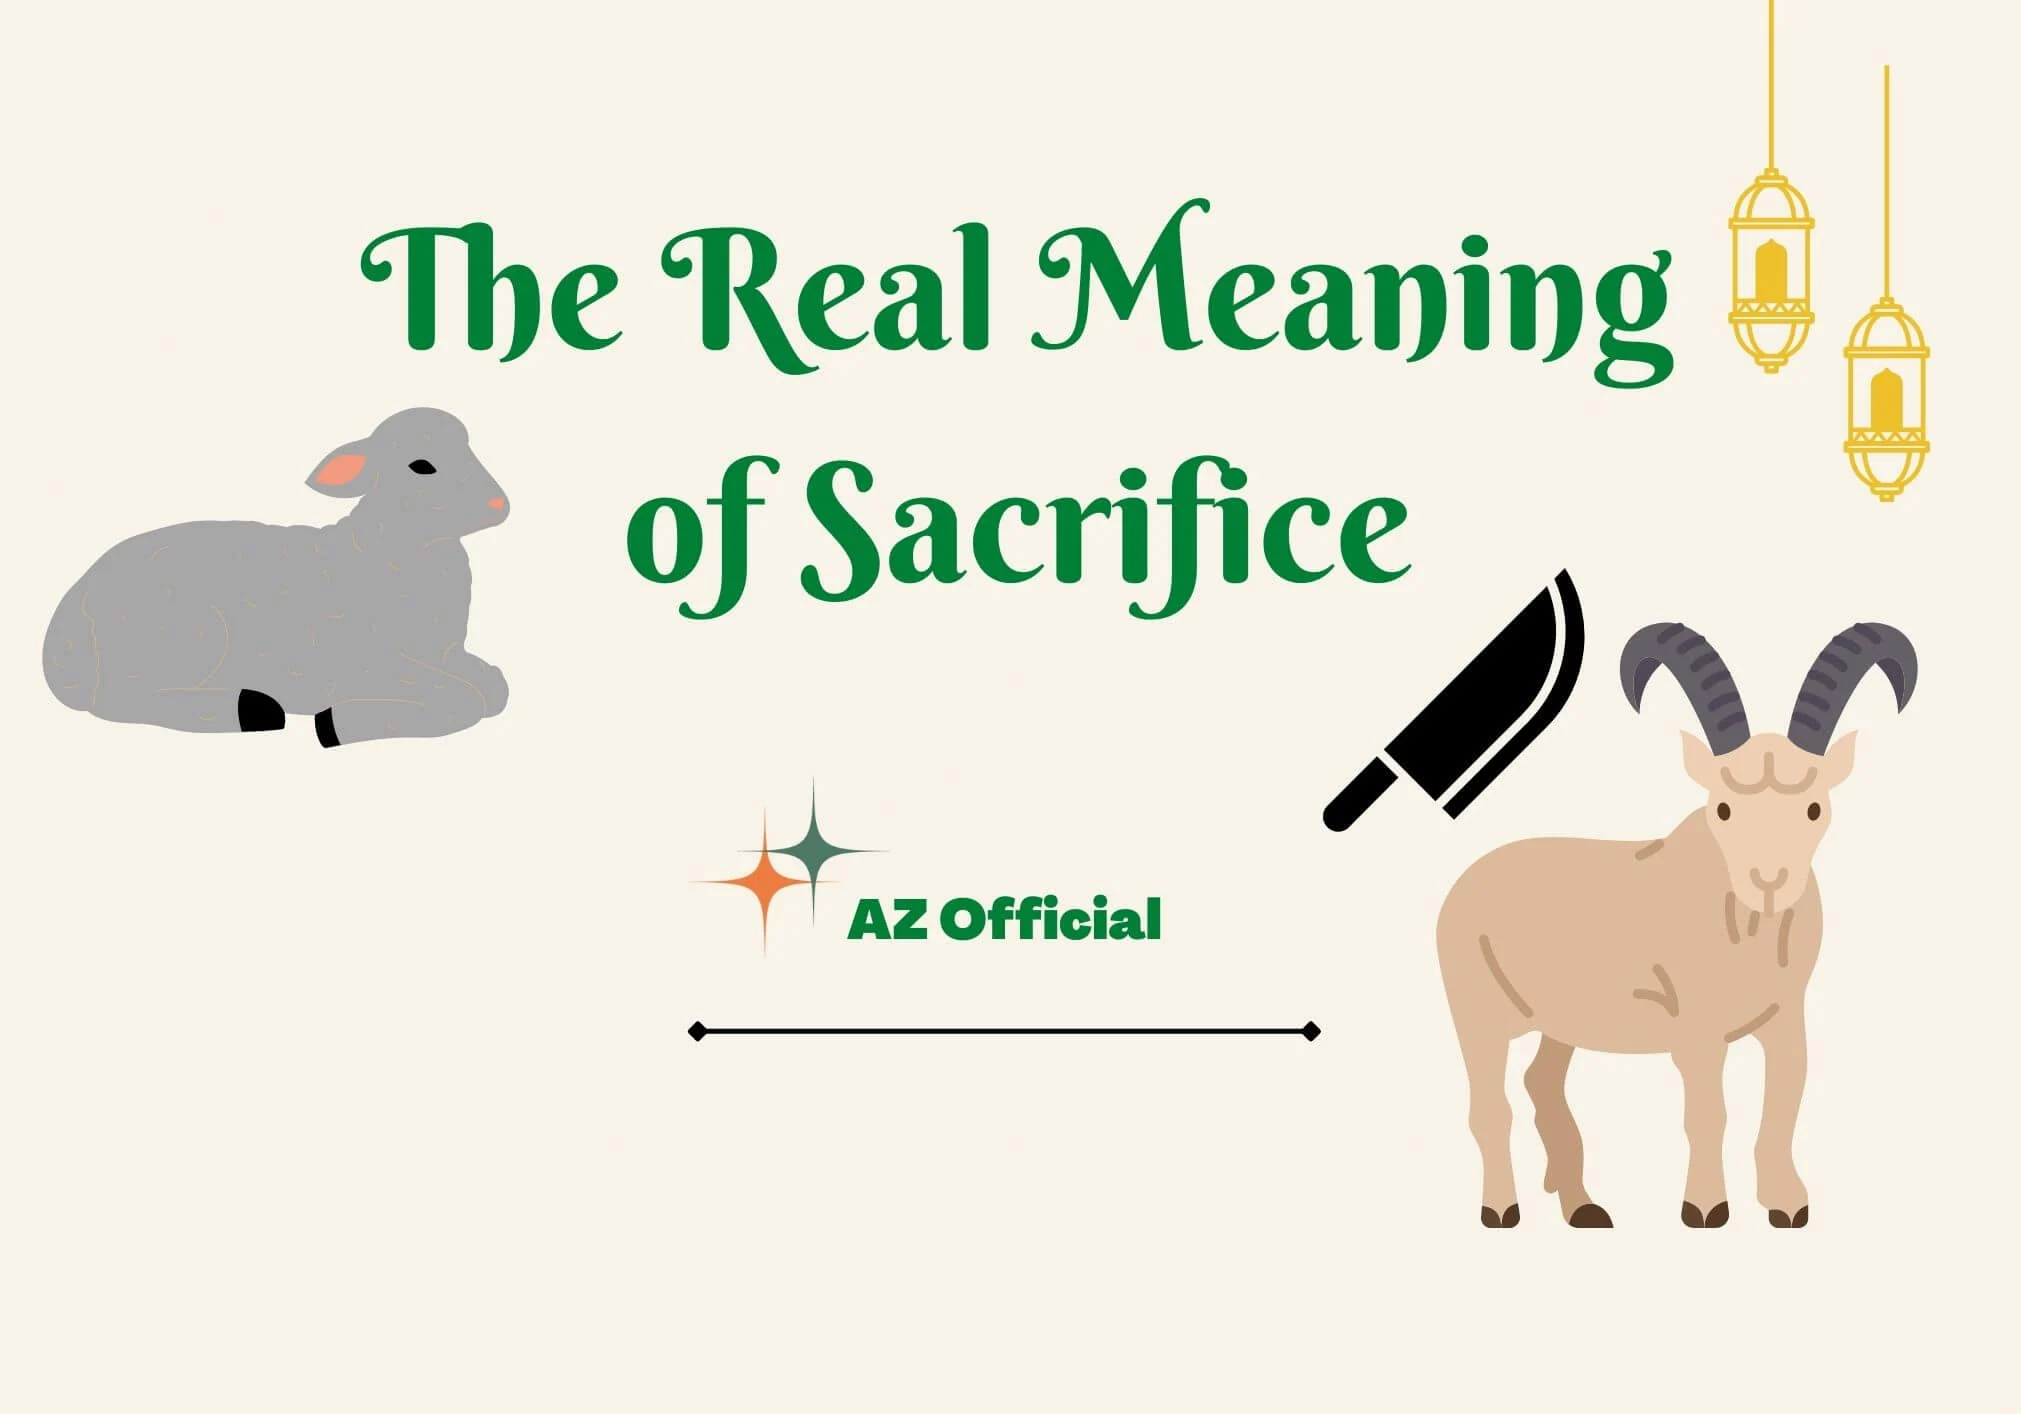 The Real Meaning of Sacrifice